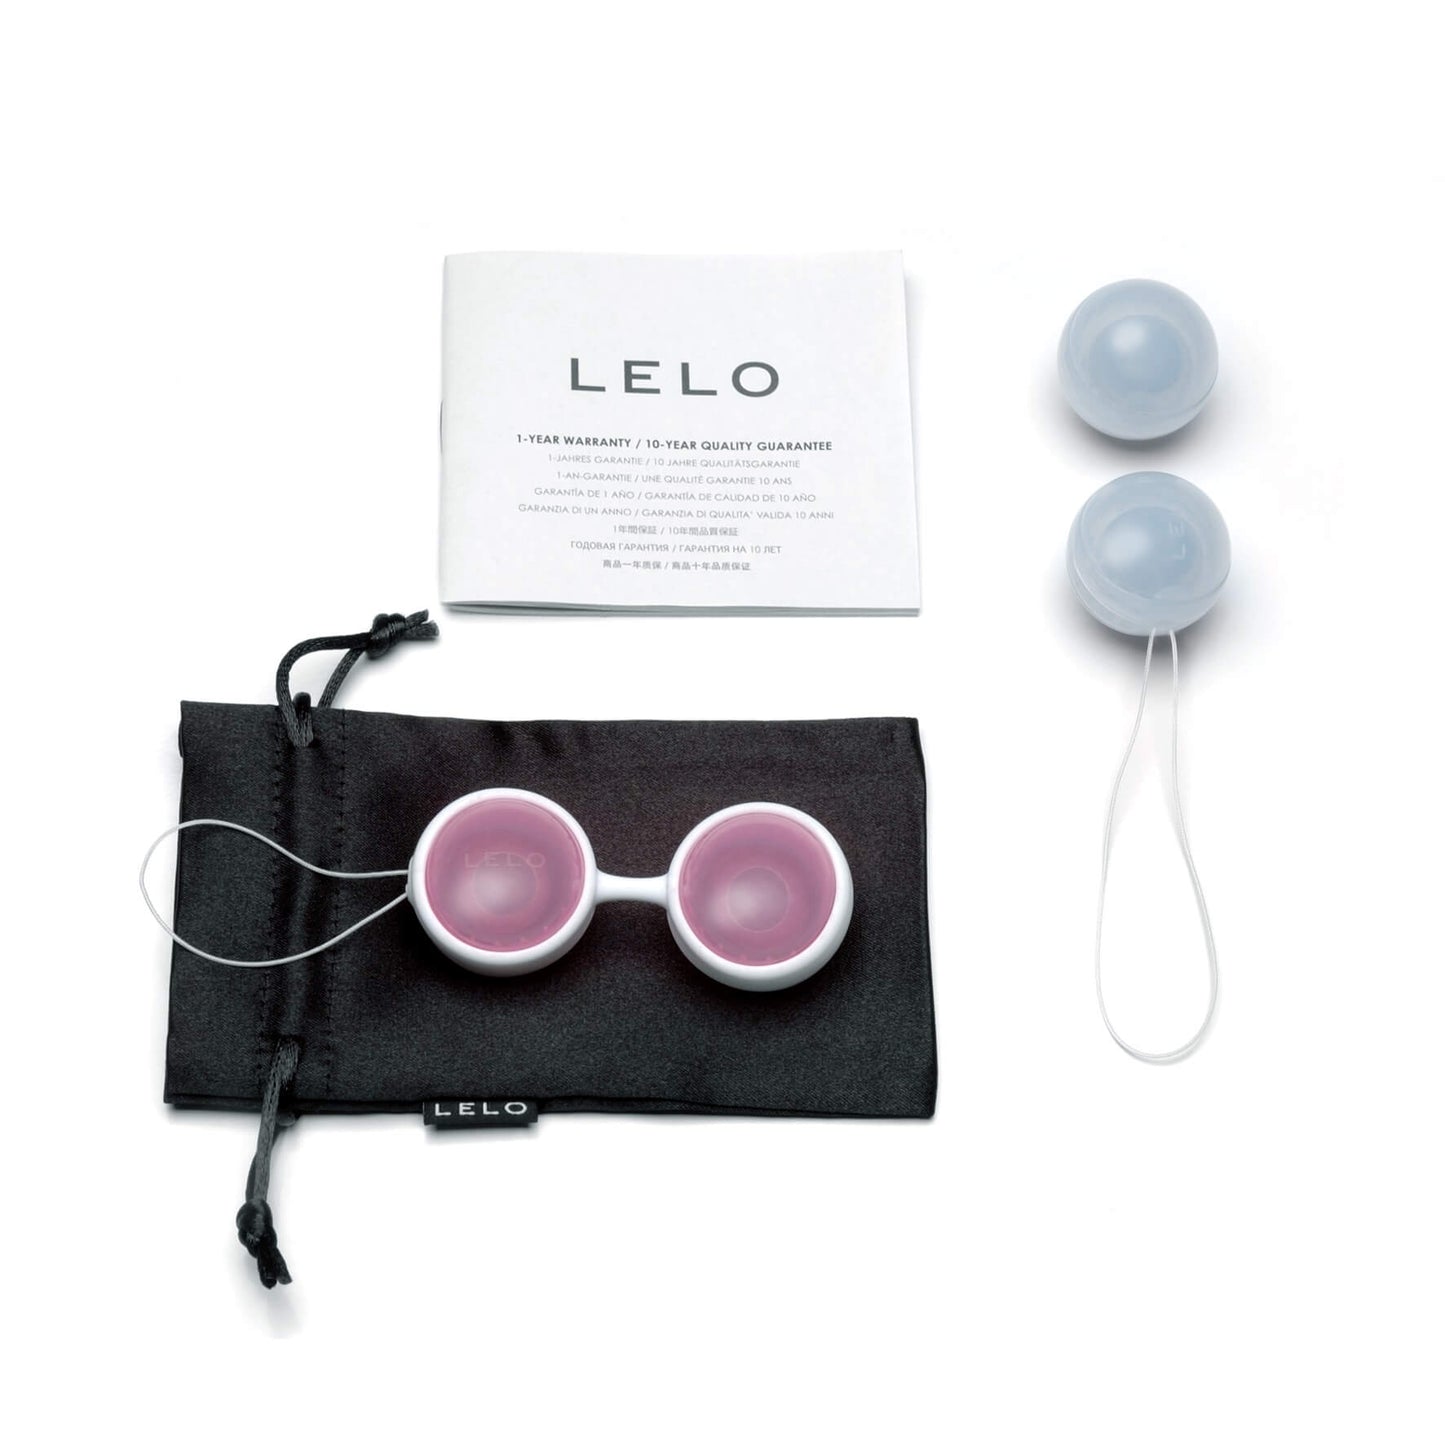 LELO Luna Beads - The Bigger O online sex toy shop USA, Canada & UK shipping available